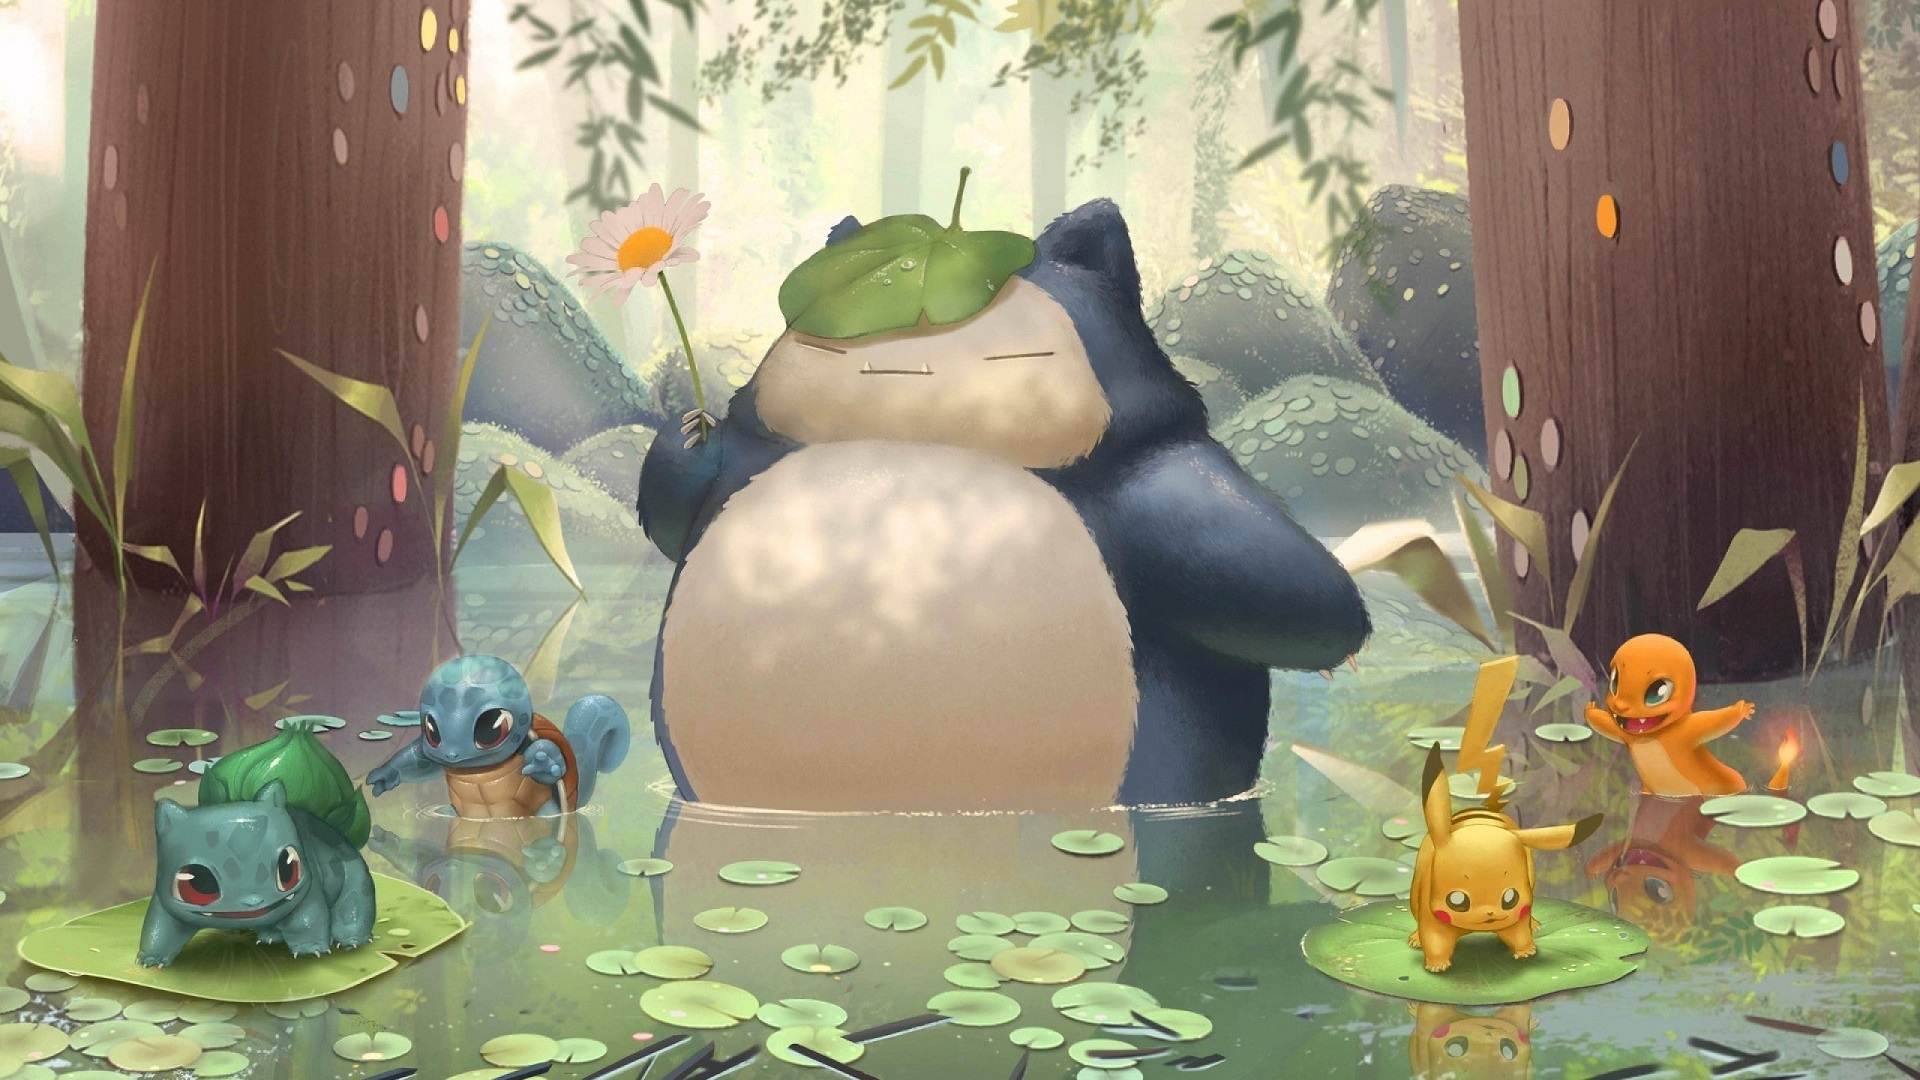 Pokemon Artwork Snorlax Bulbasaur Pikachu Squirtle Charmander Swamp Trees Lily Pads Flowers Nature F 1920x1080